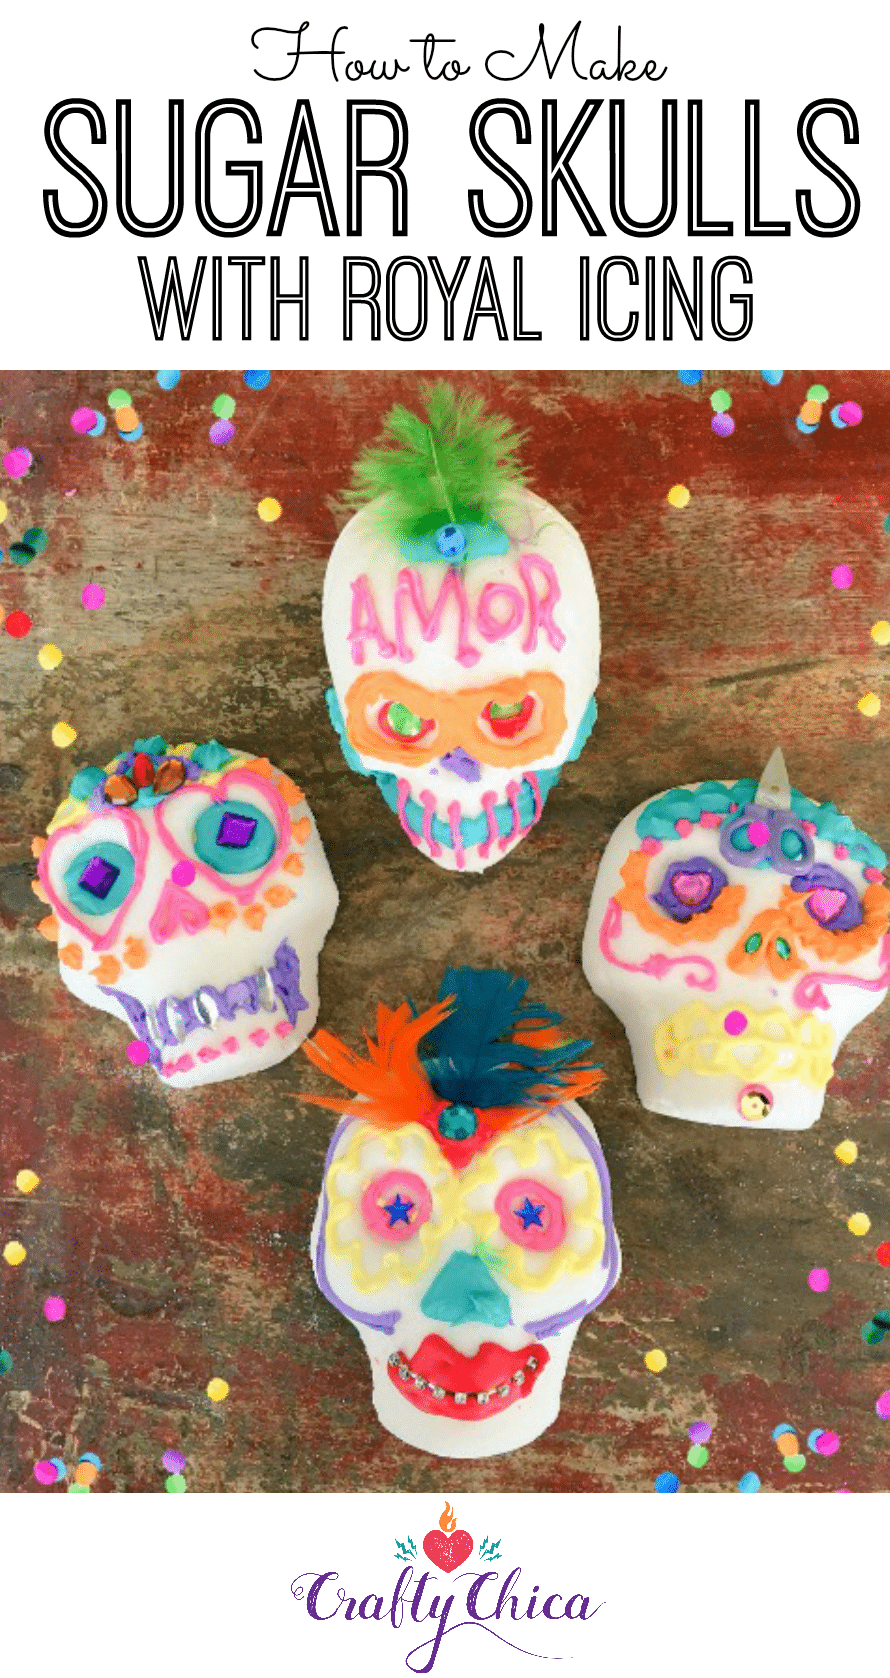 Decorated sugar skulls on a table with confetti.